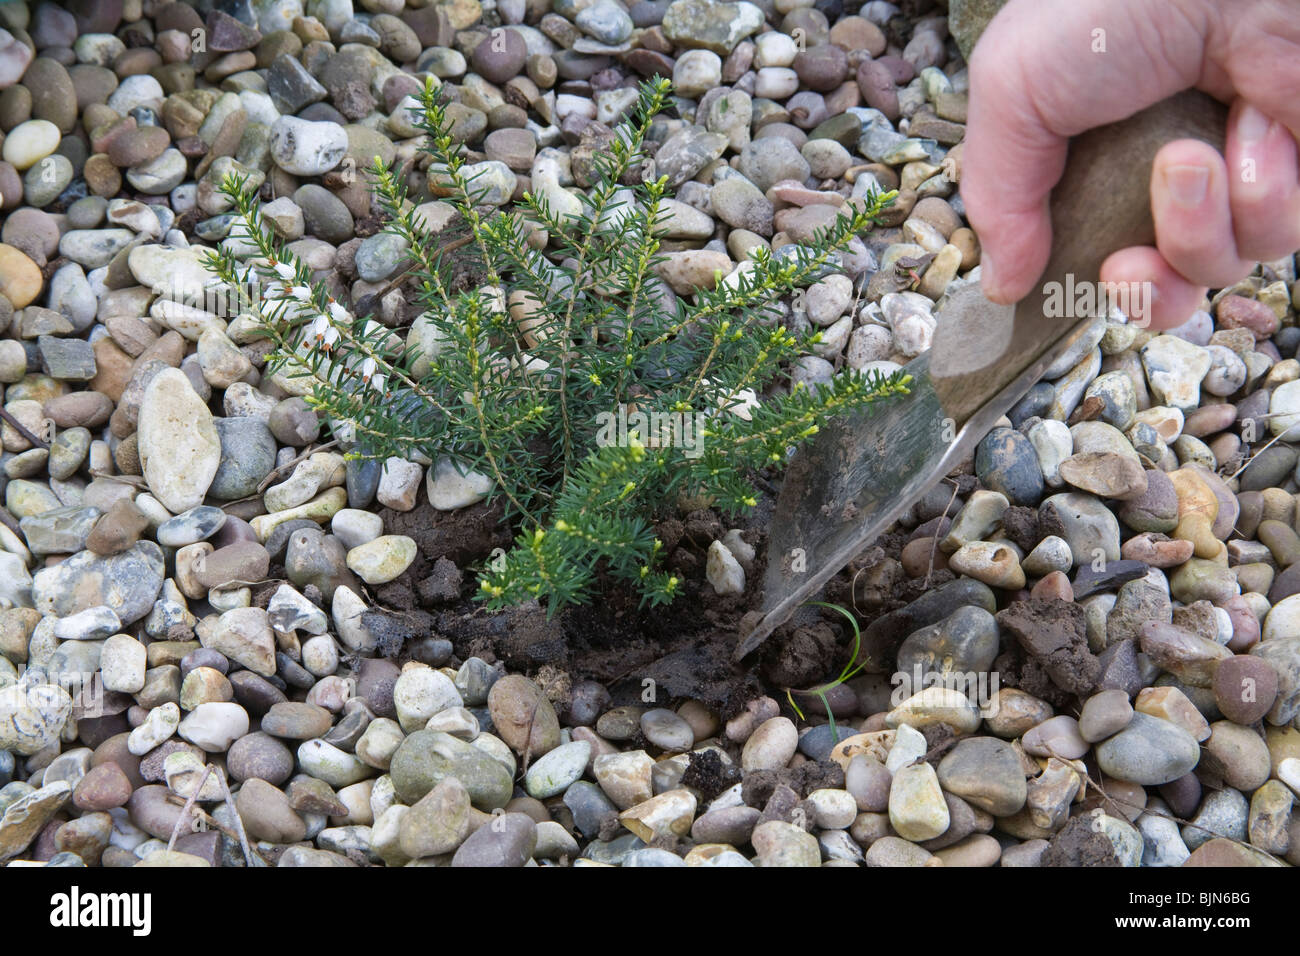 Close up Planting a heather plant in a low maintenance garden plot covered in pebbles Stock Photo